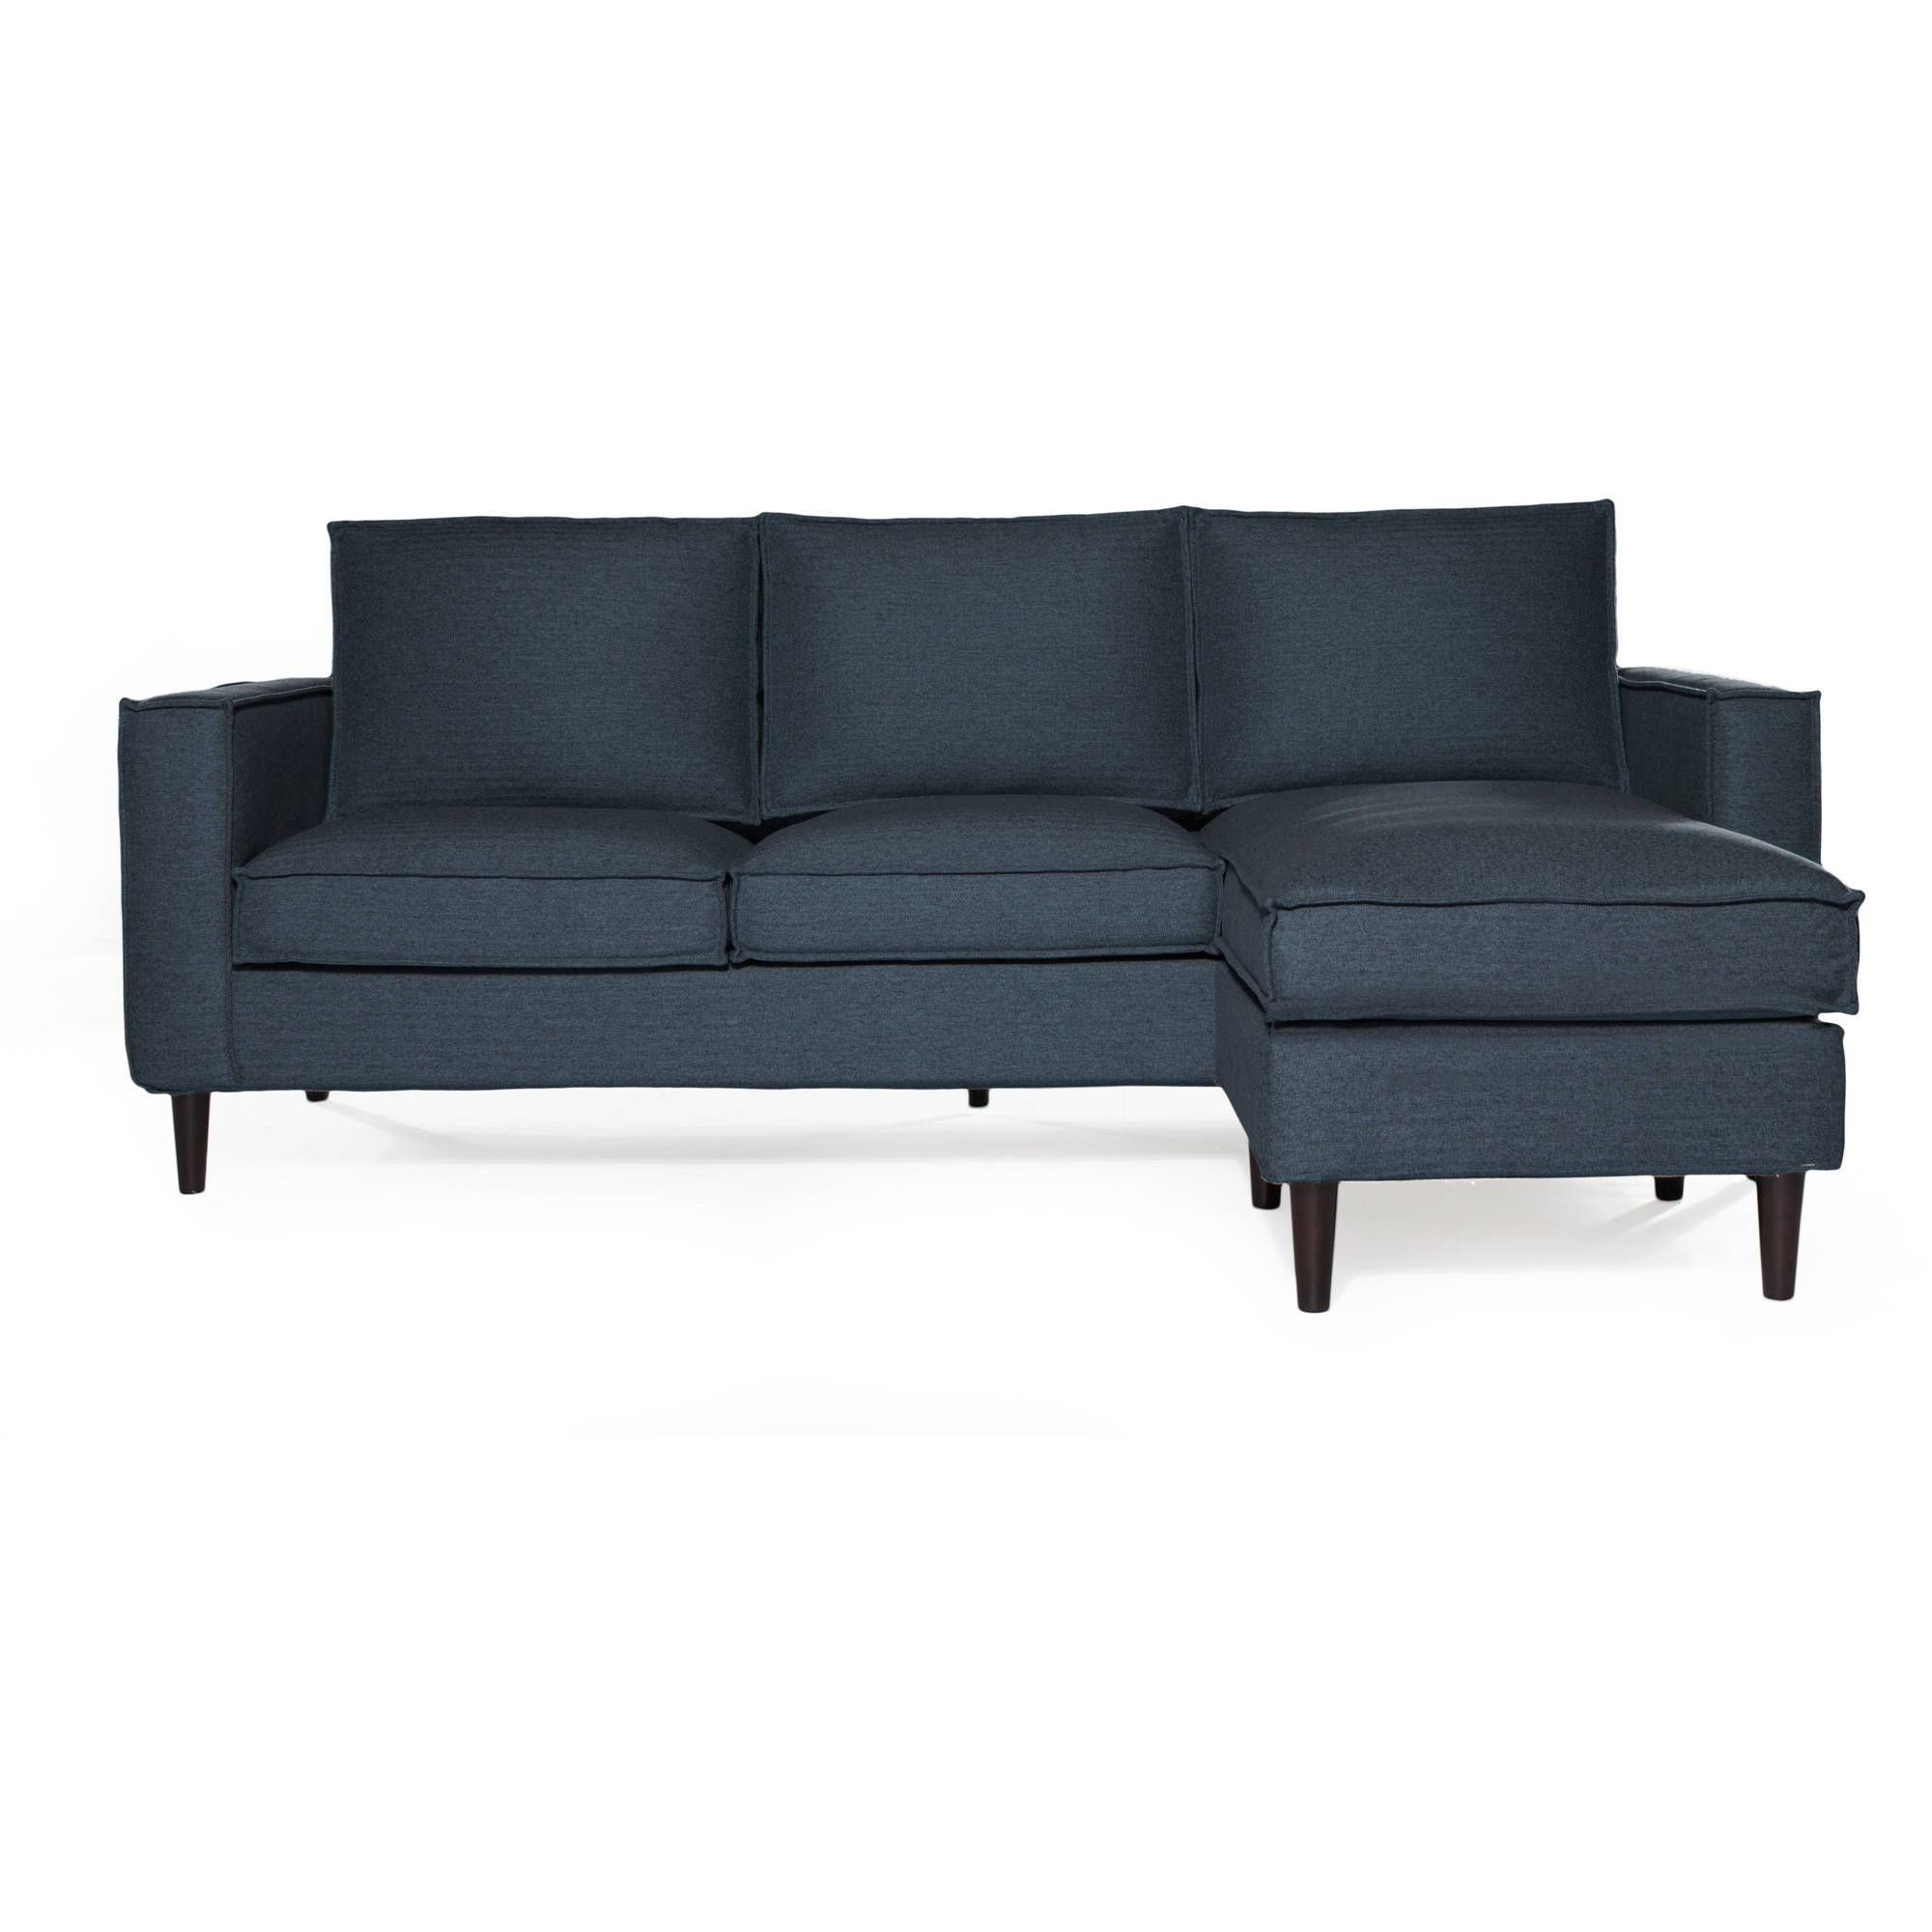 Sofas & Couches – Walmart In Very Large Sofas (View 15 of 30)